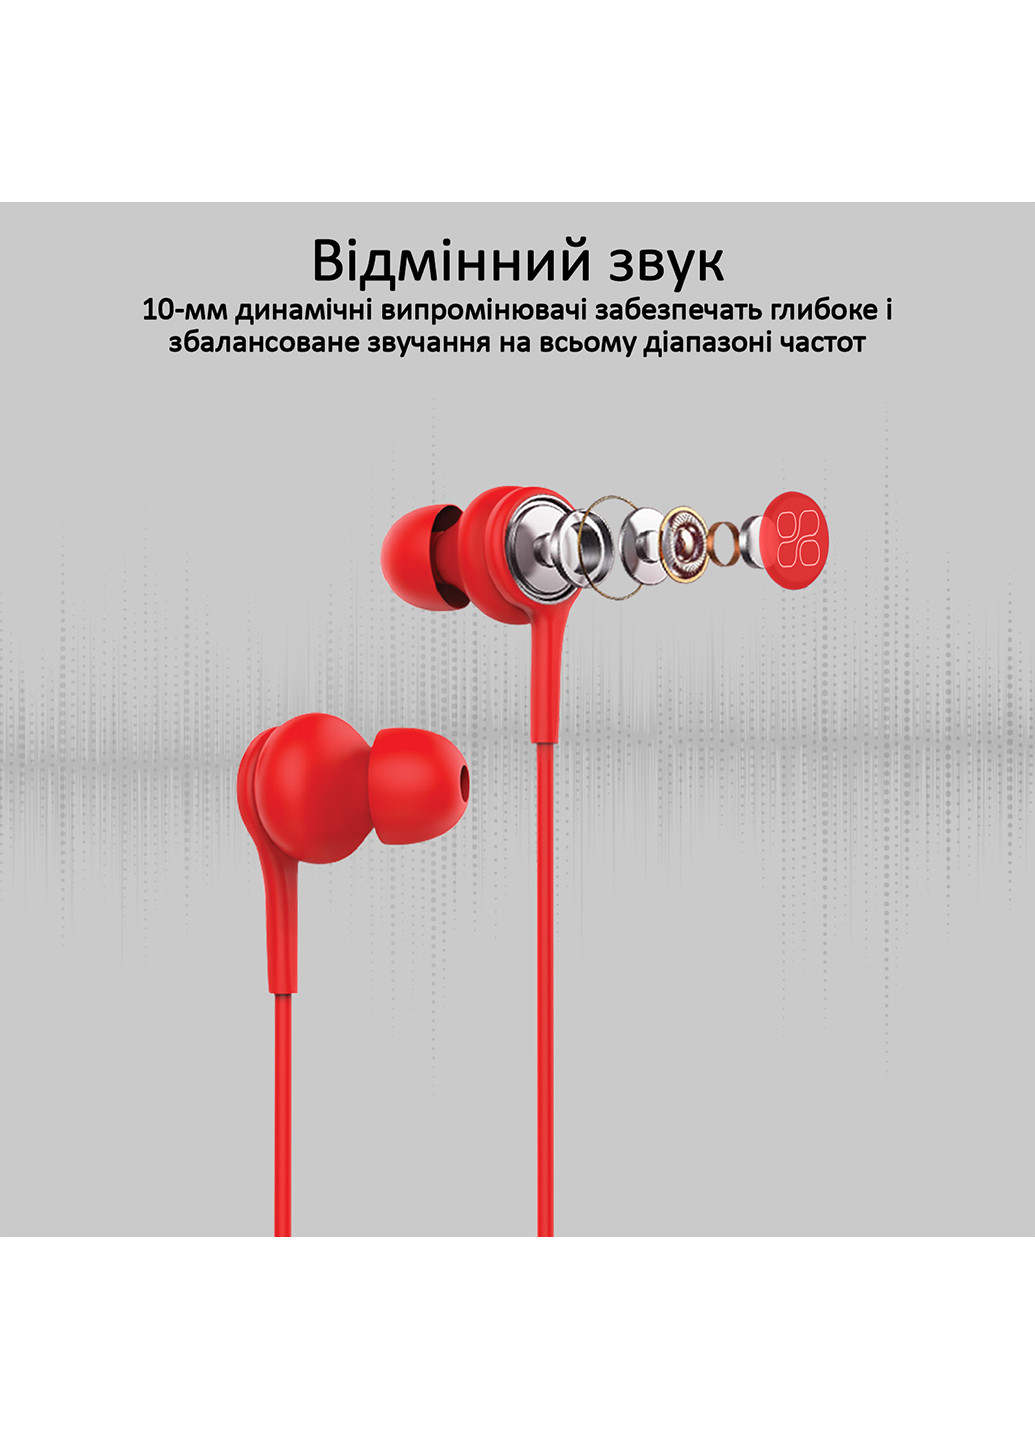 Навушники Duet Red () Promate duet.red (201154207)